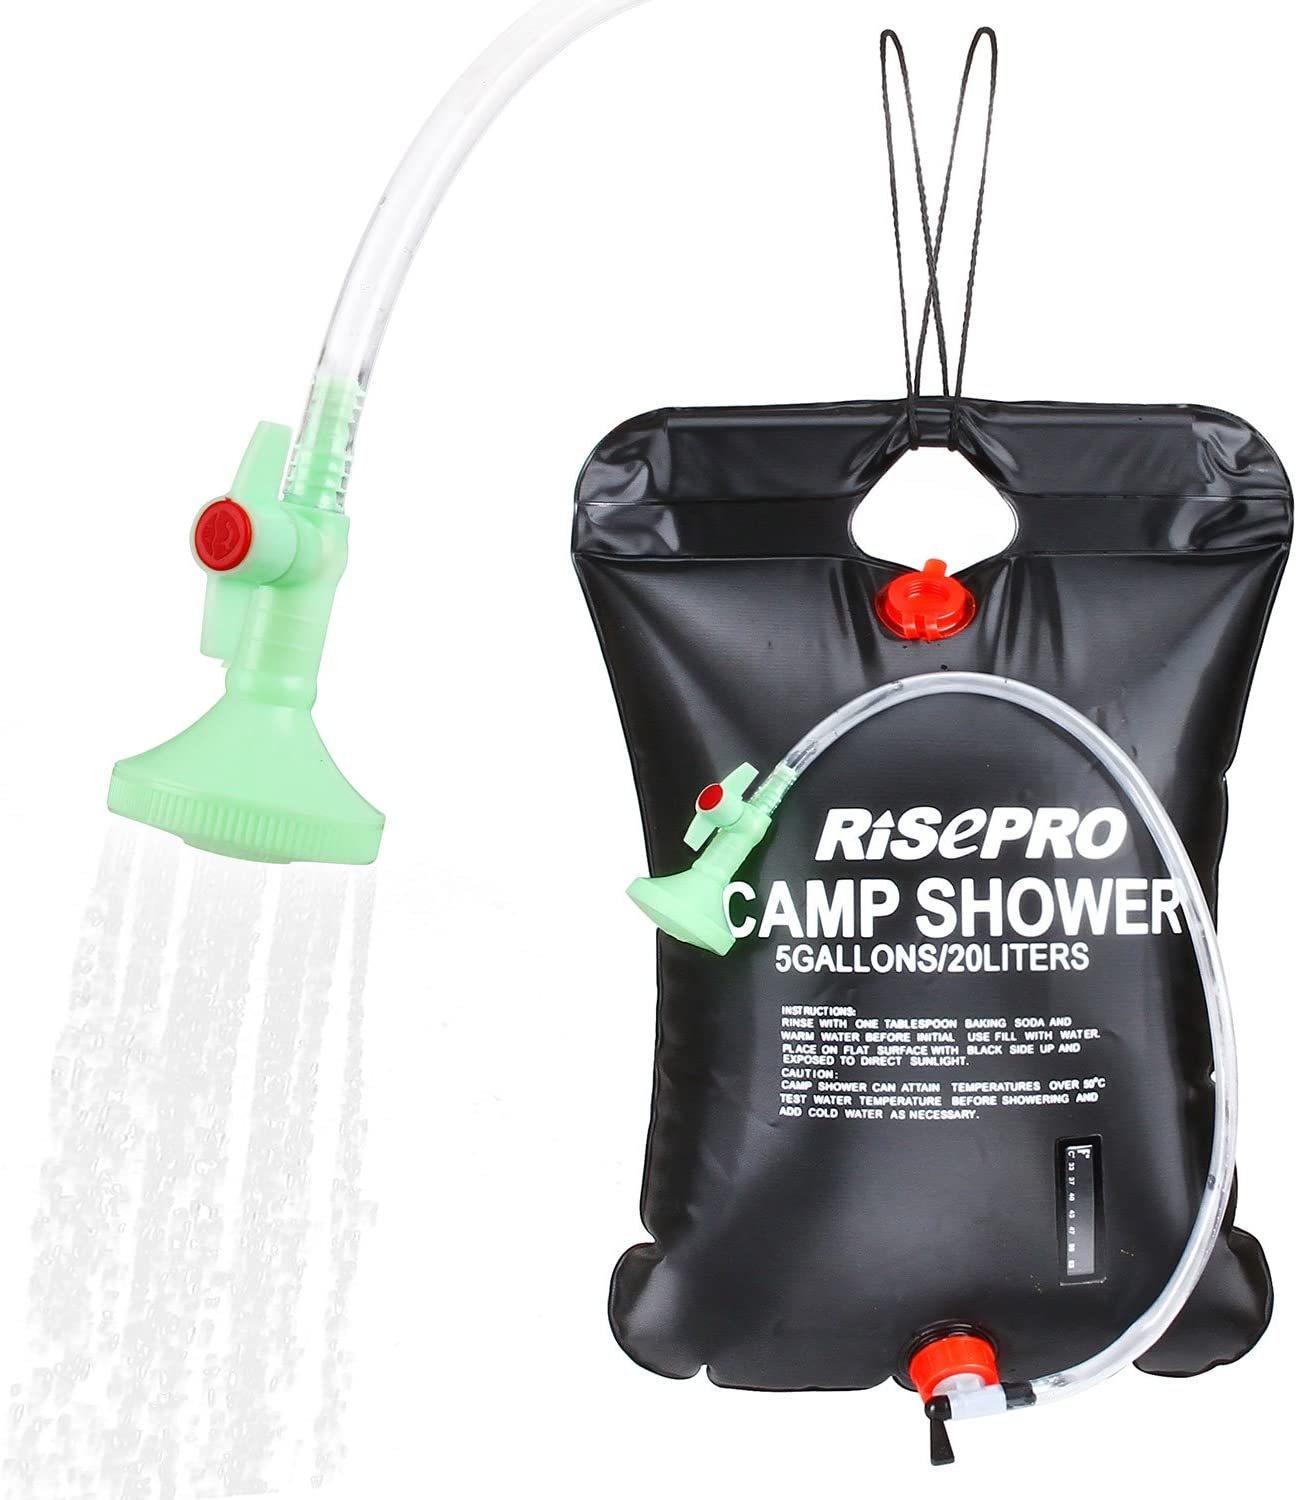 a portable shower for campervan trips